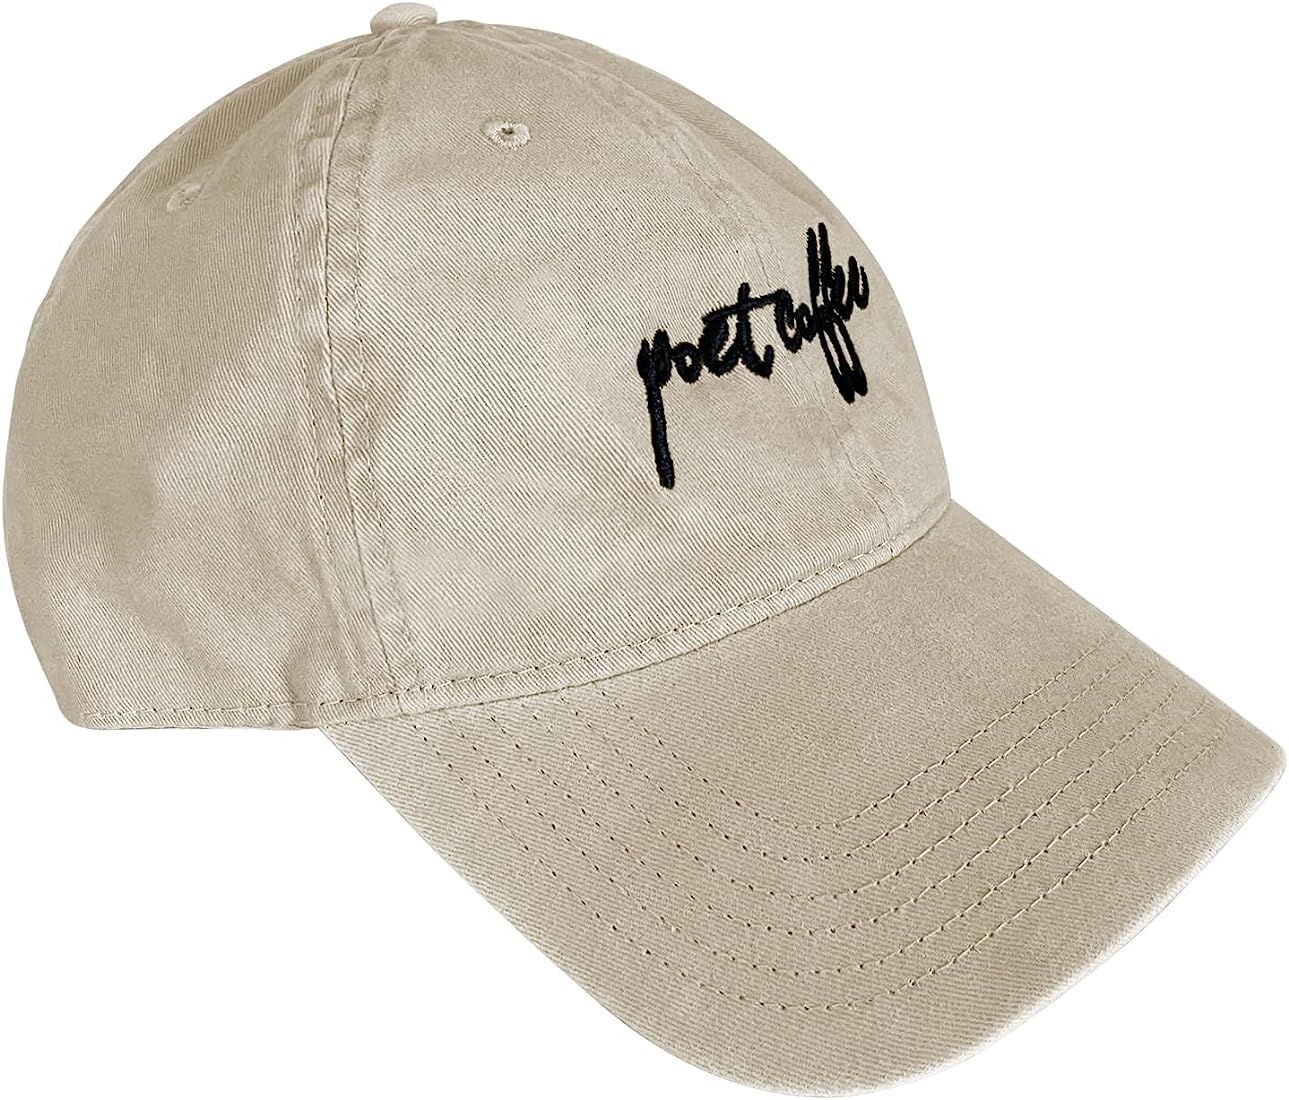 Atticus Poetry-Poet Coffee Dad Hat, Embroidered and Garment Washed, Cotton Twill Baseball Cap, | Amazon (US)